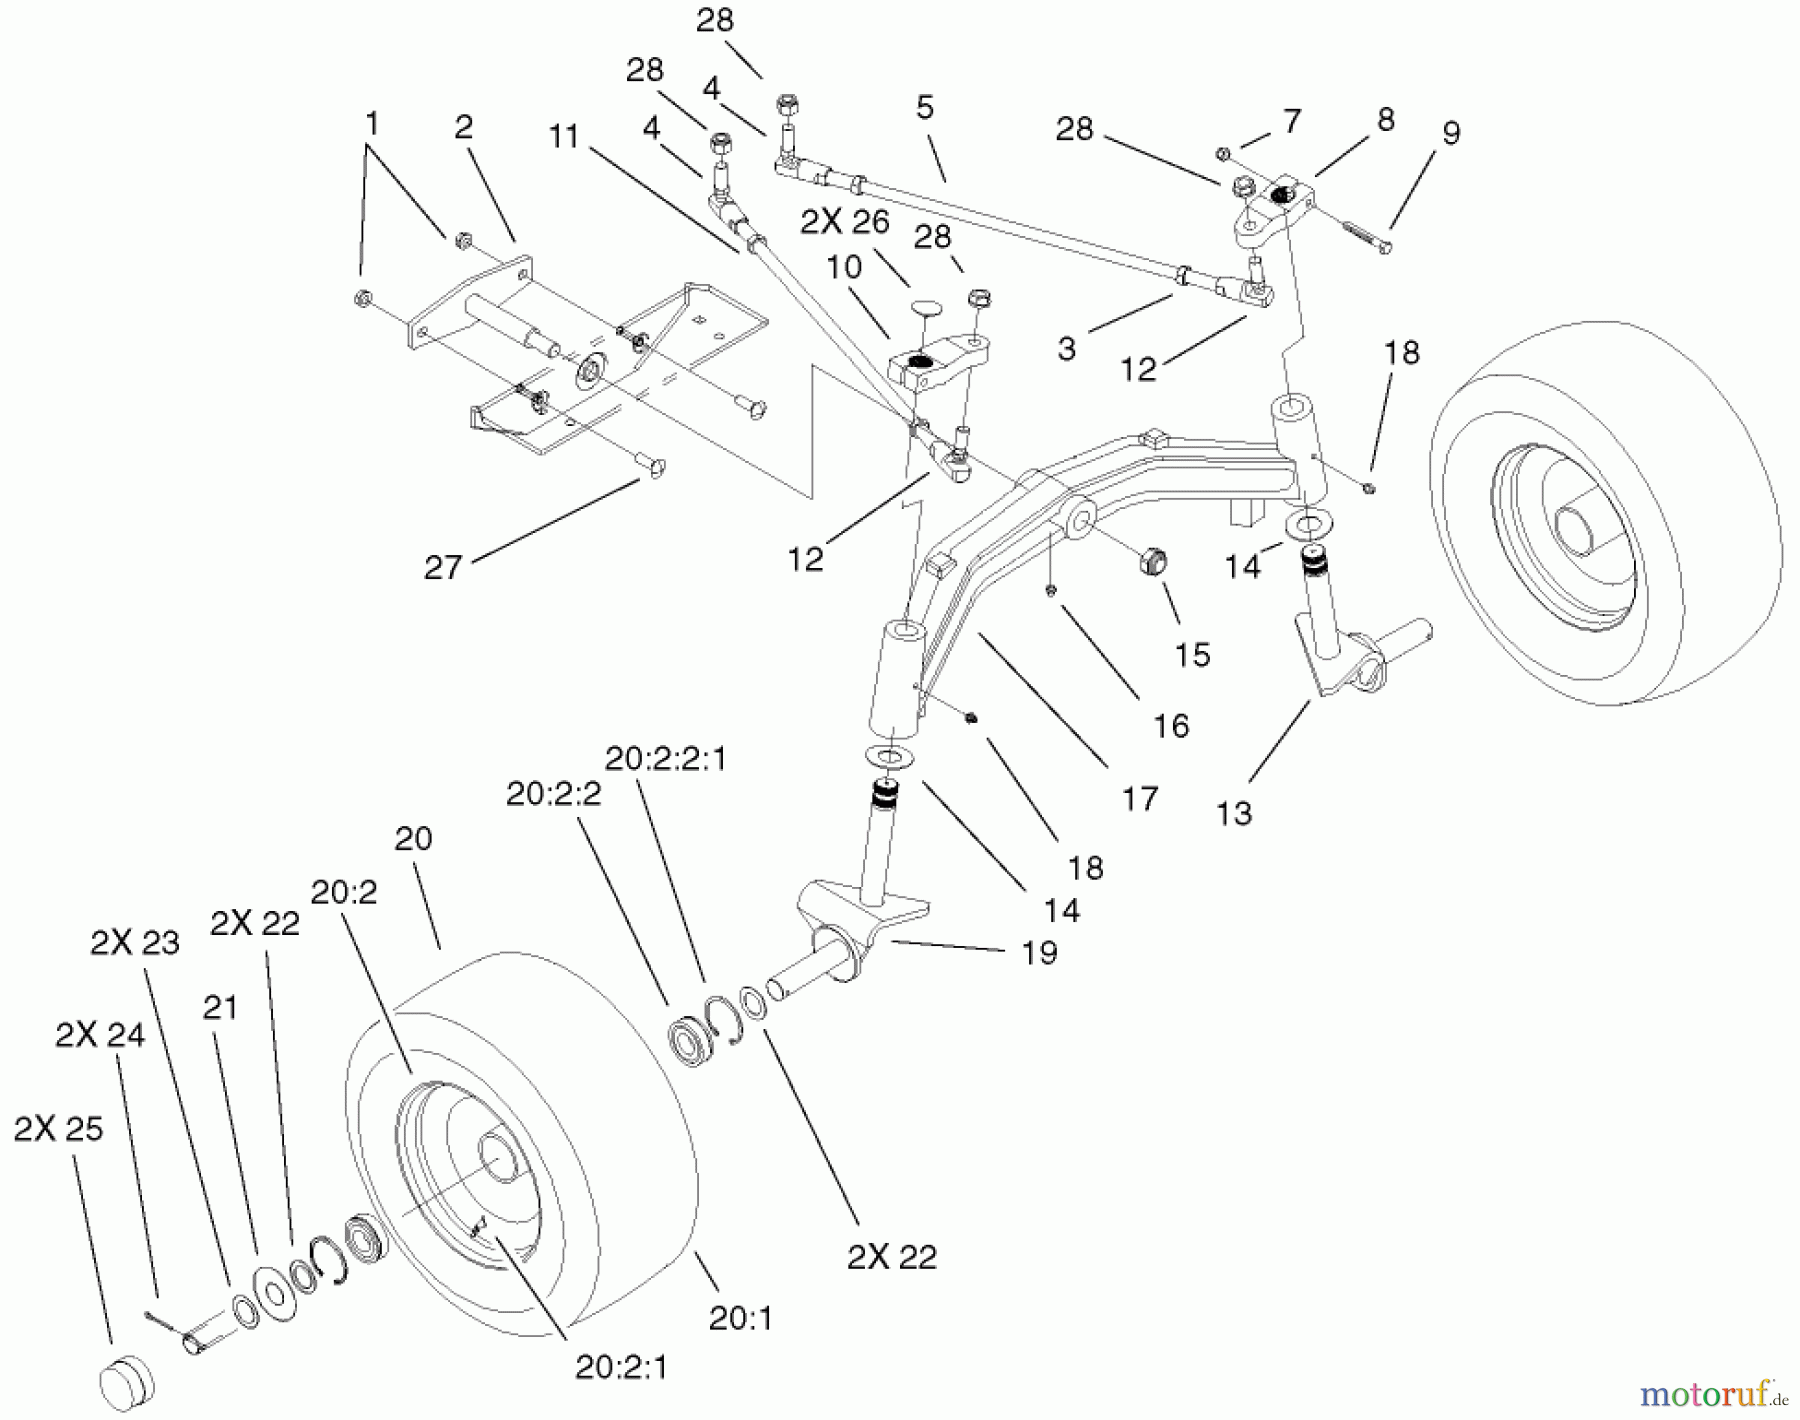  Toro Neu Mowers, Lawn & Garden Tractor Seite 1 73590 (523Dxi) - Toro 523Dxi Garden Tractor, 2001 (210000001-210999999) TIE RODS, SPINDLE & FRONT AXLE ASSEMBLY